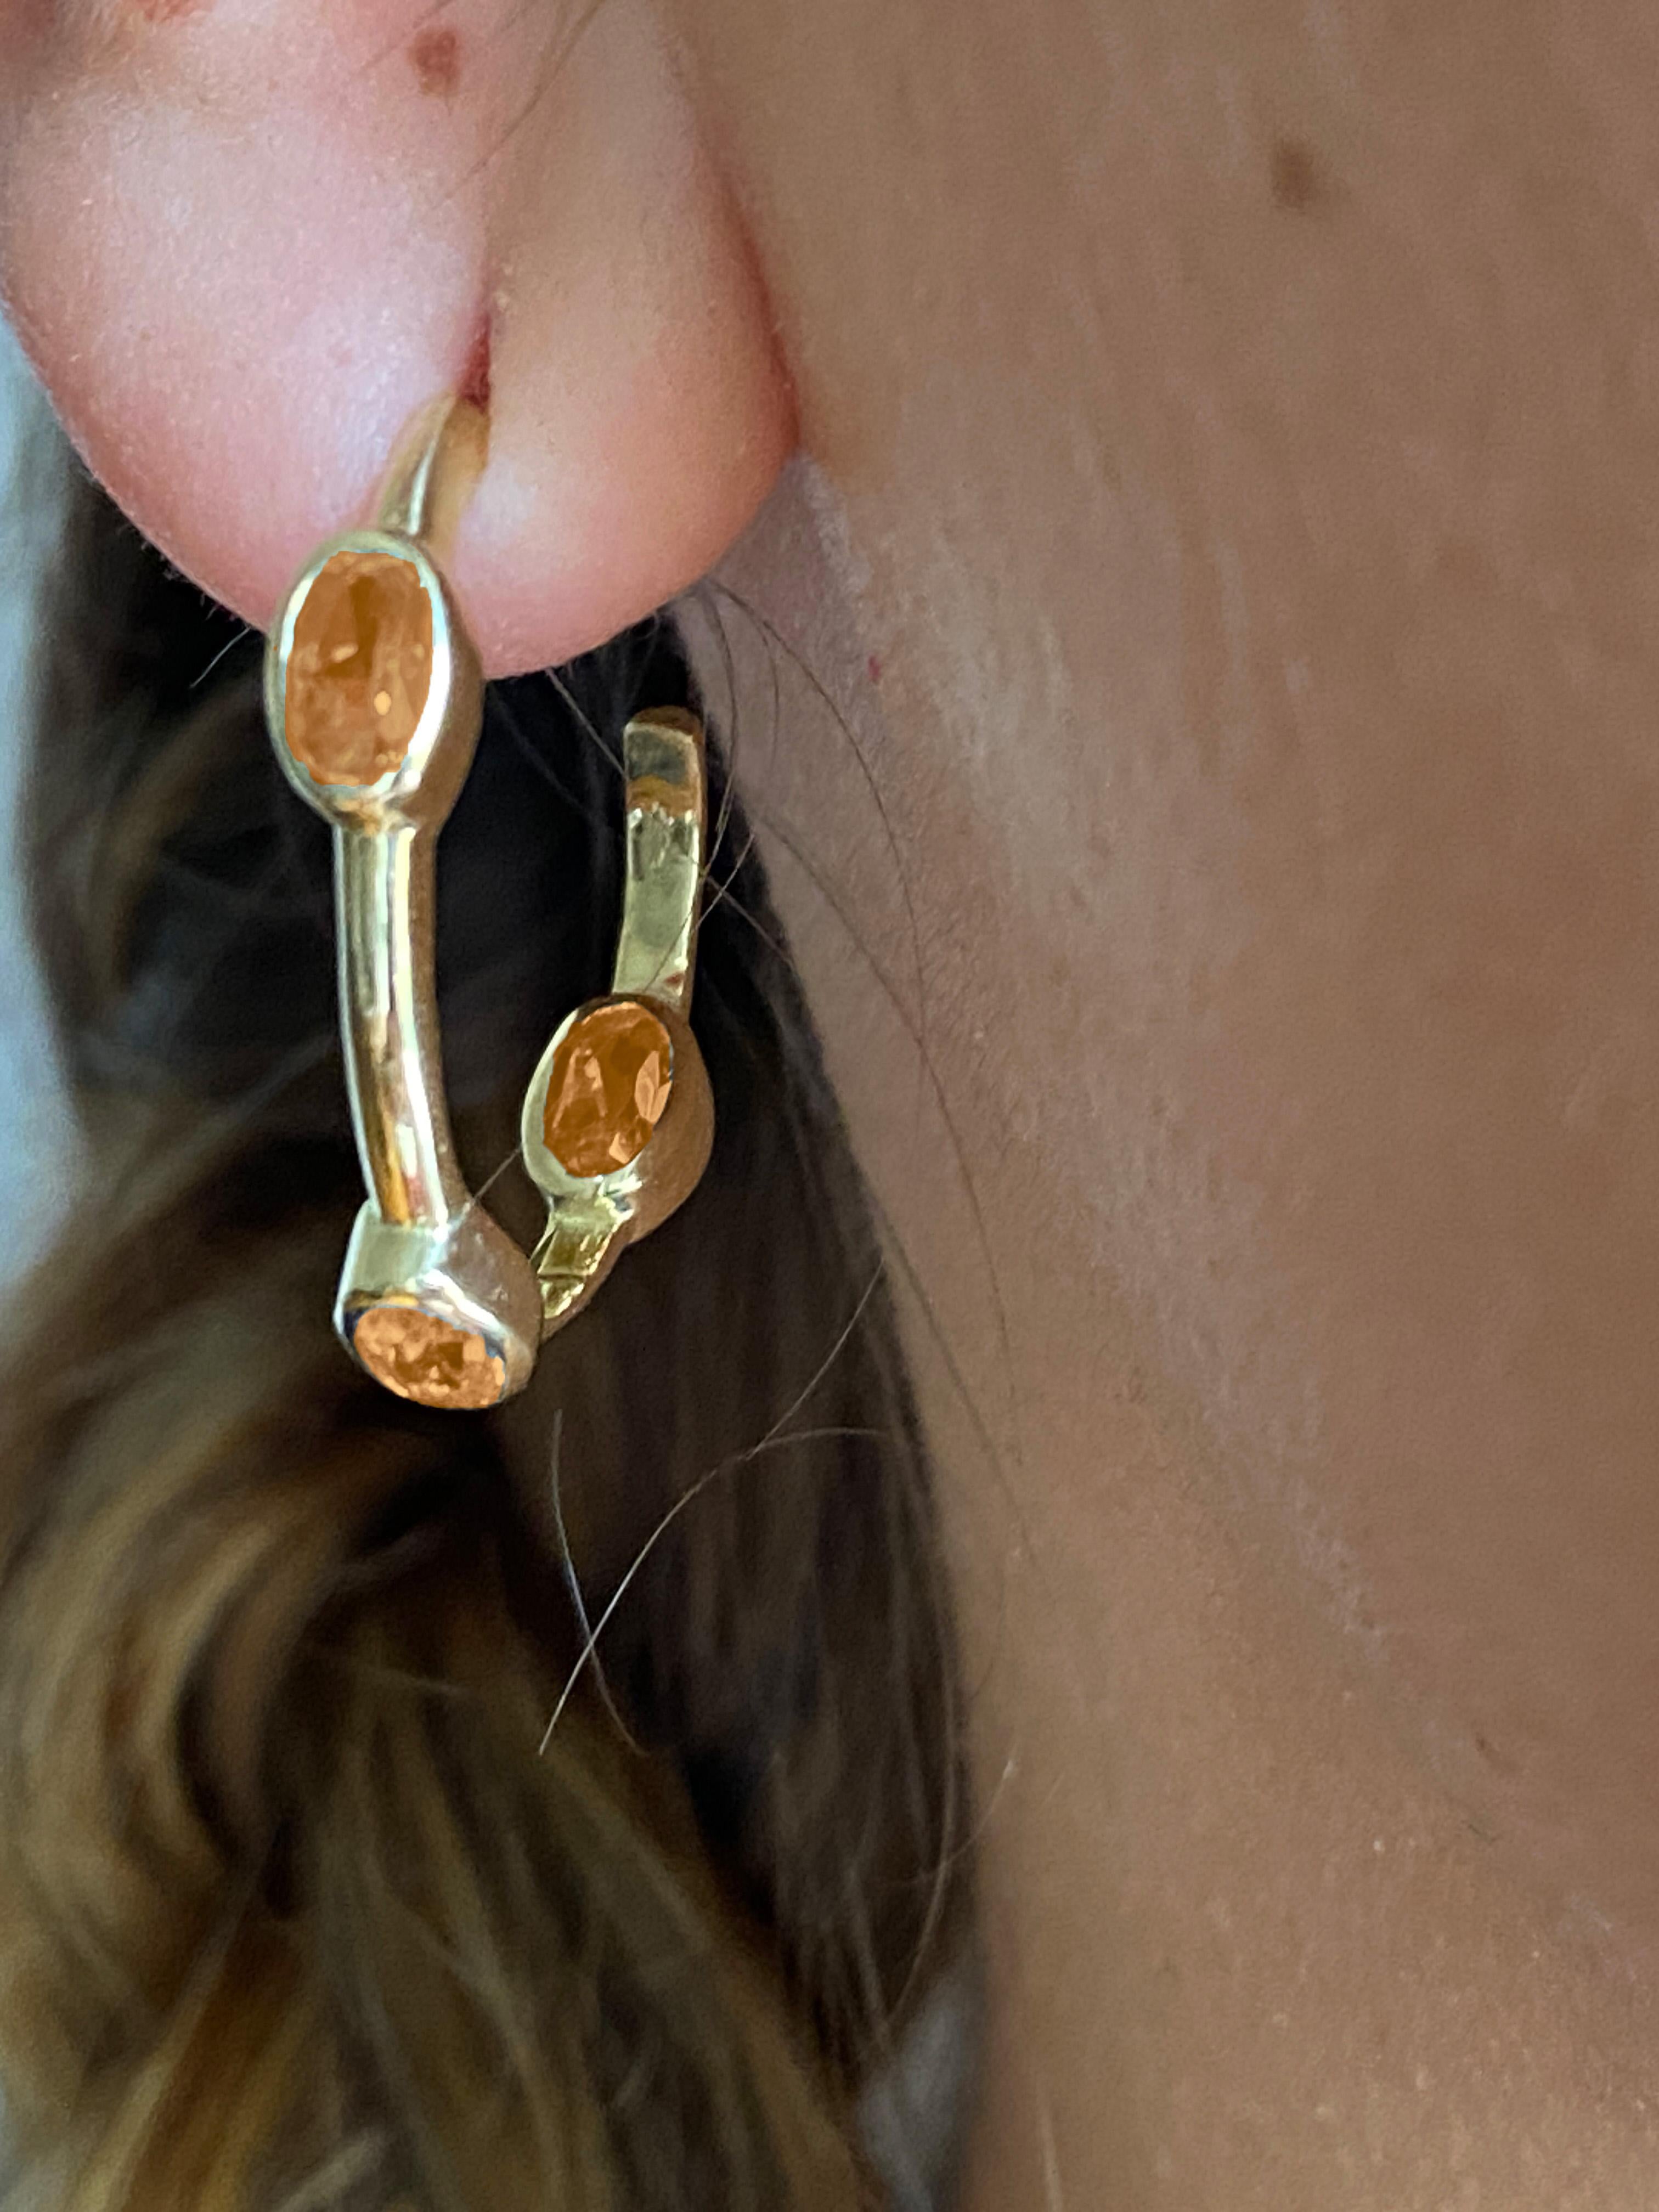 Introducing Rossella Ugolini's Unisex Citrine Hoop Earrings, a symbol of timeless elegance and modern sophistication. Handcrafted in Italy, these unisex hoop earrings redefine classic beauty with a contemporary twist.

Each hoop, boasting a 2 cm